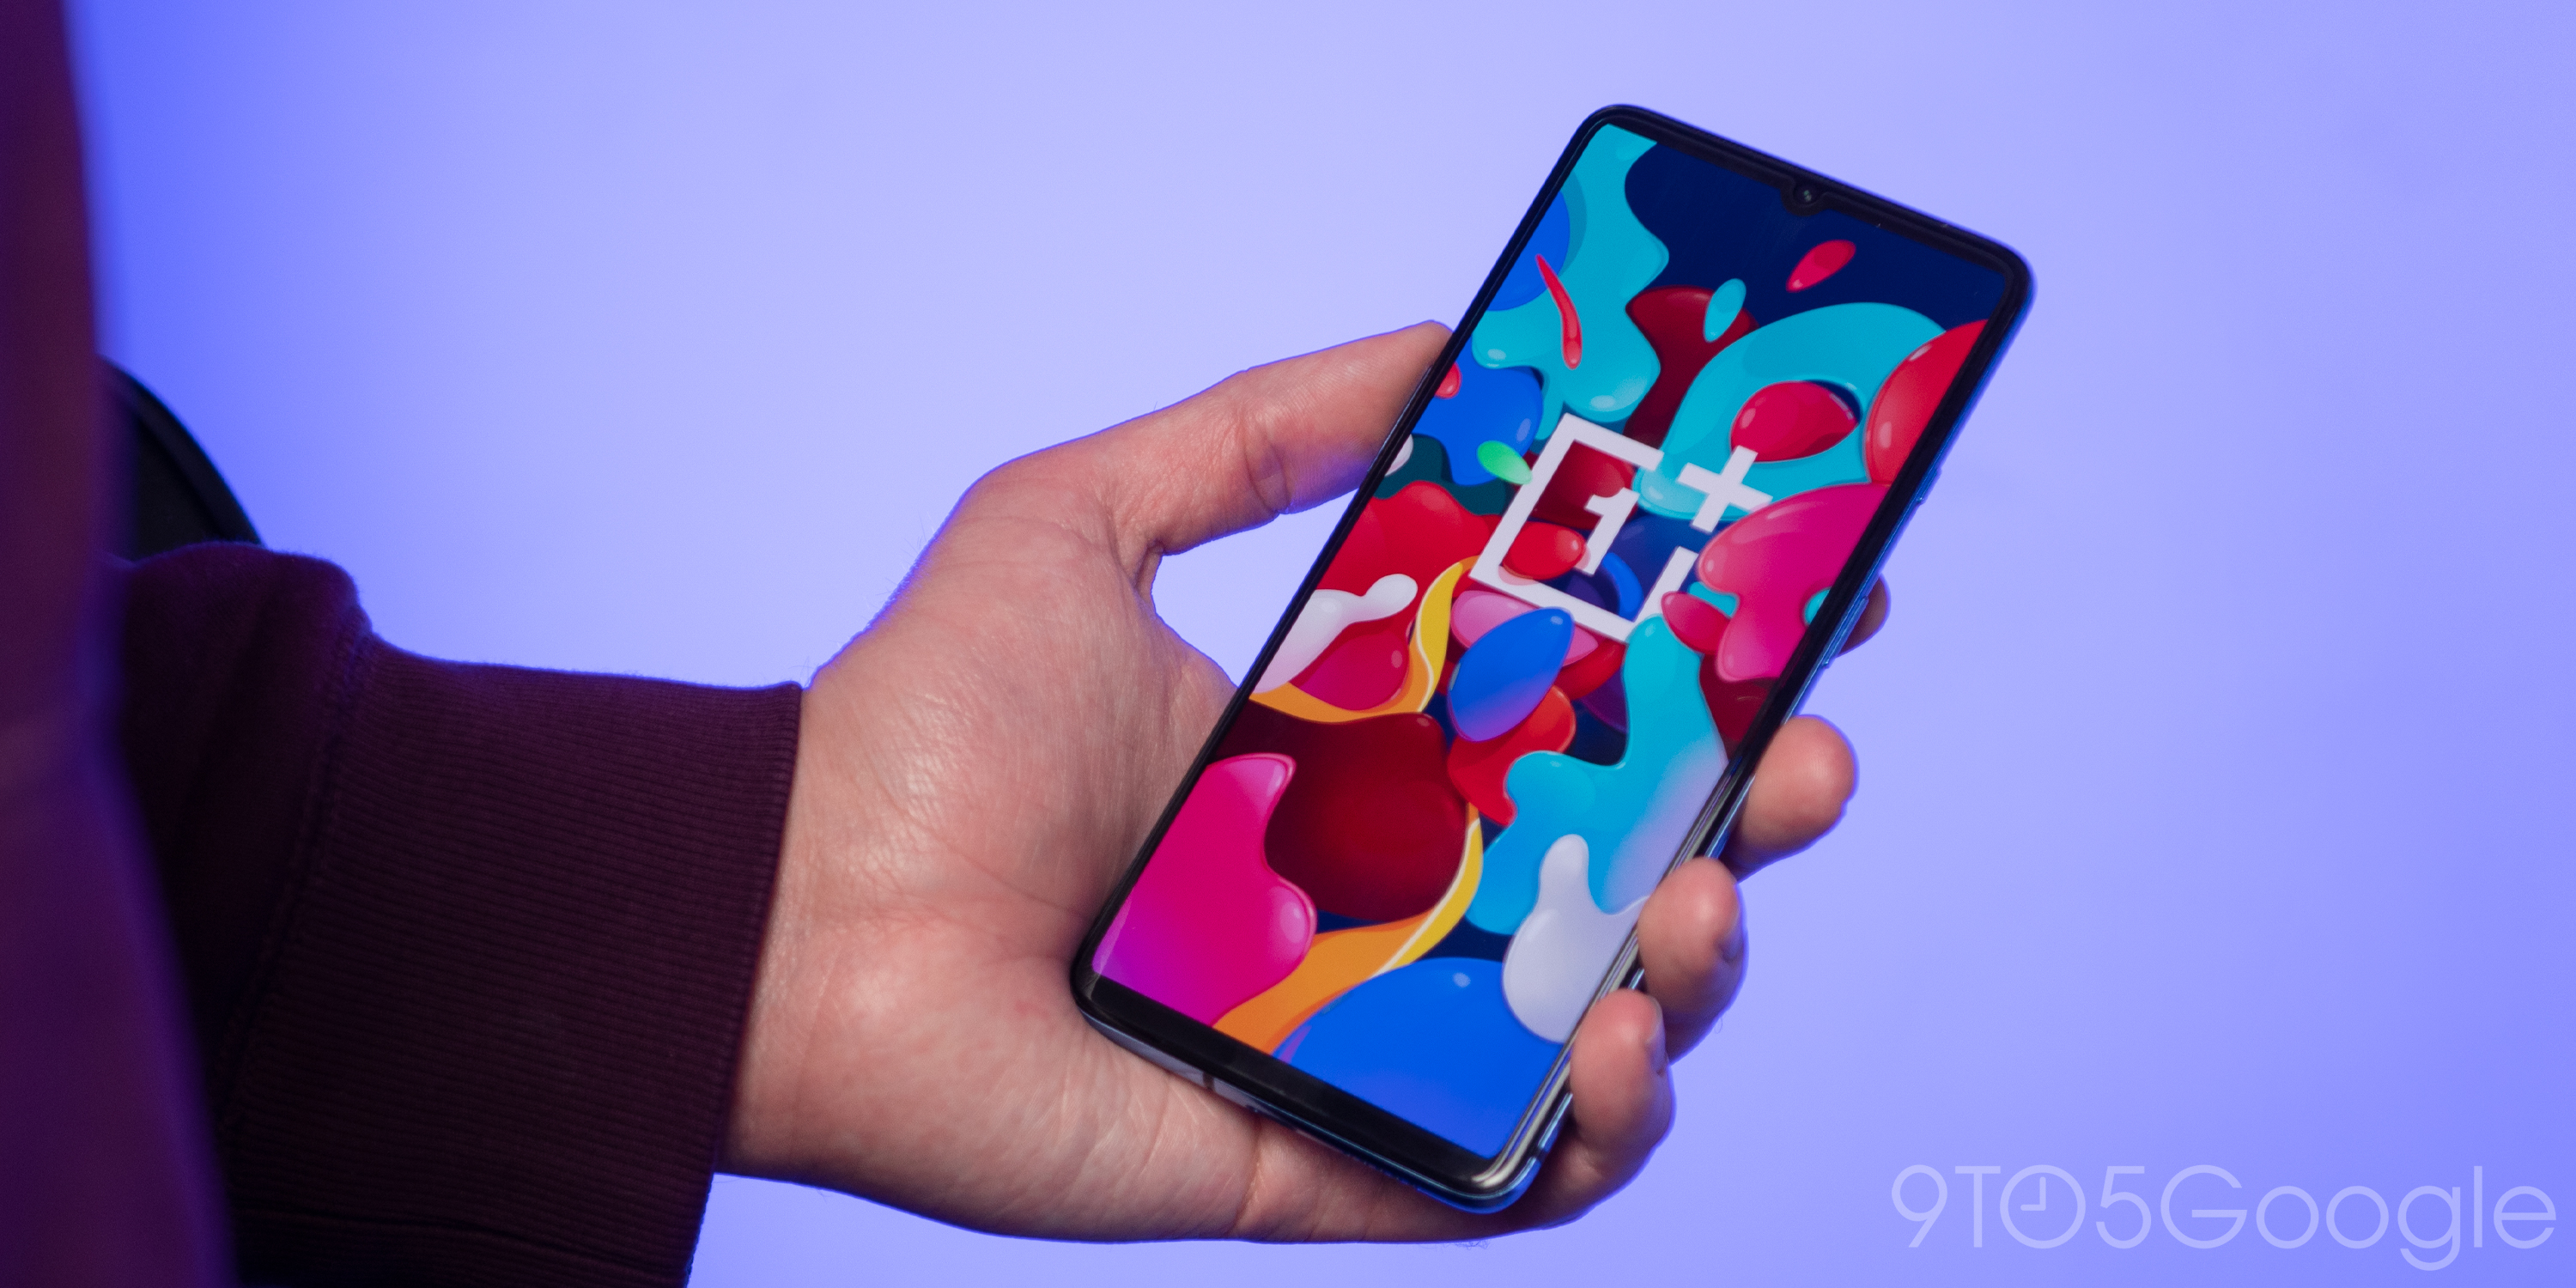 Download New Oneplus Wallpapers W Colorful New Logo 9to5google